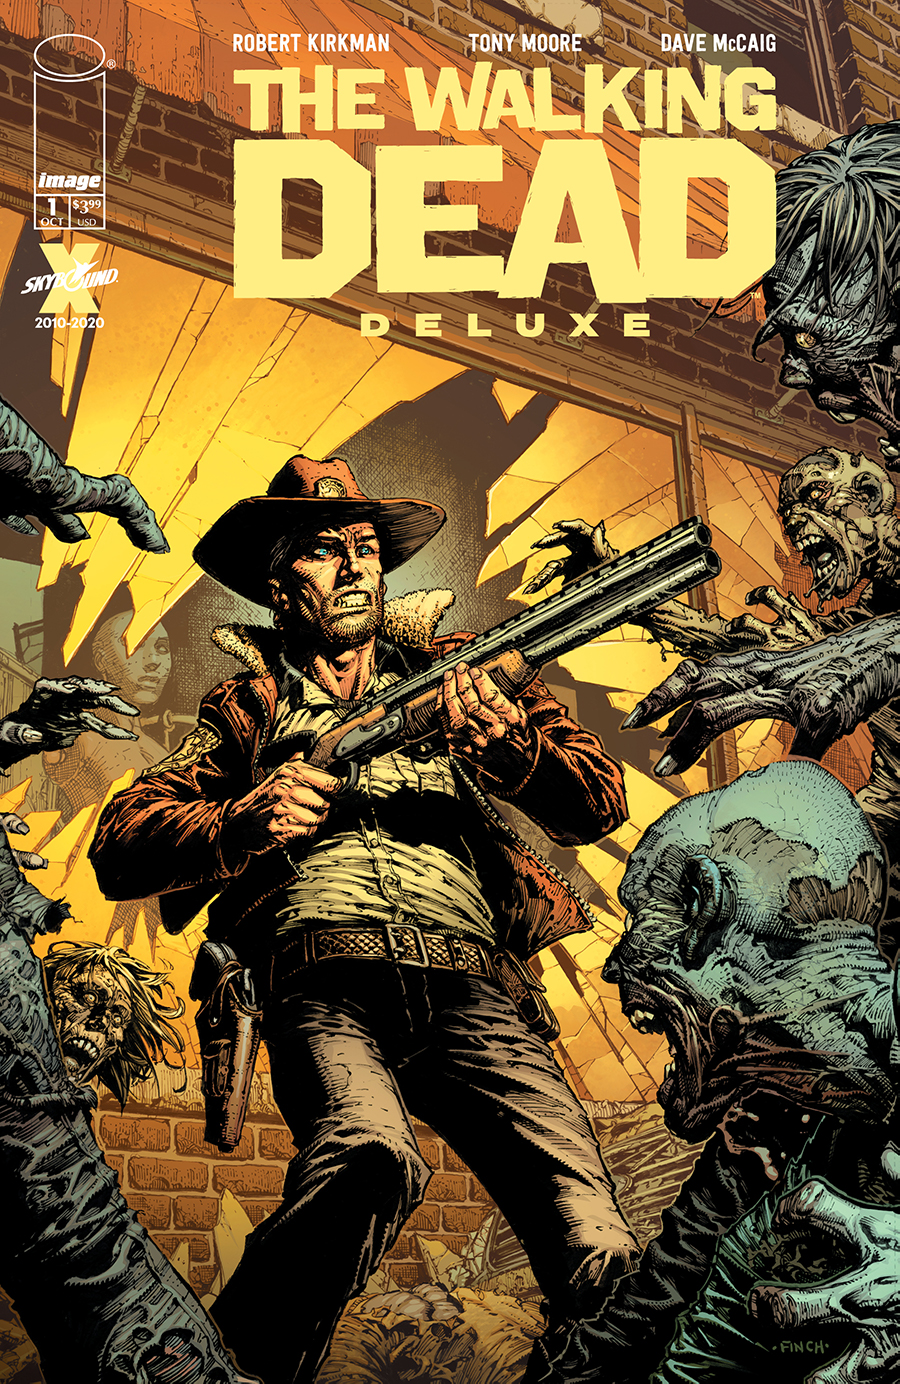 The Walking Dead Comics To Be Released In Color For First Time This October